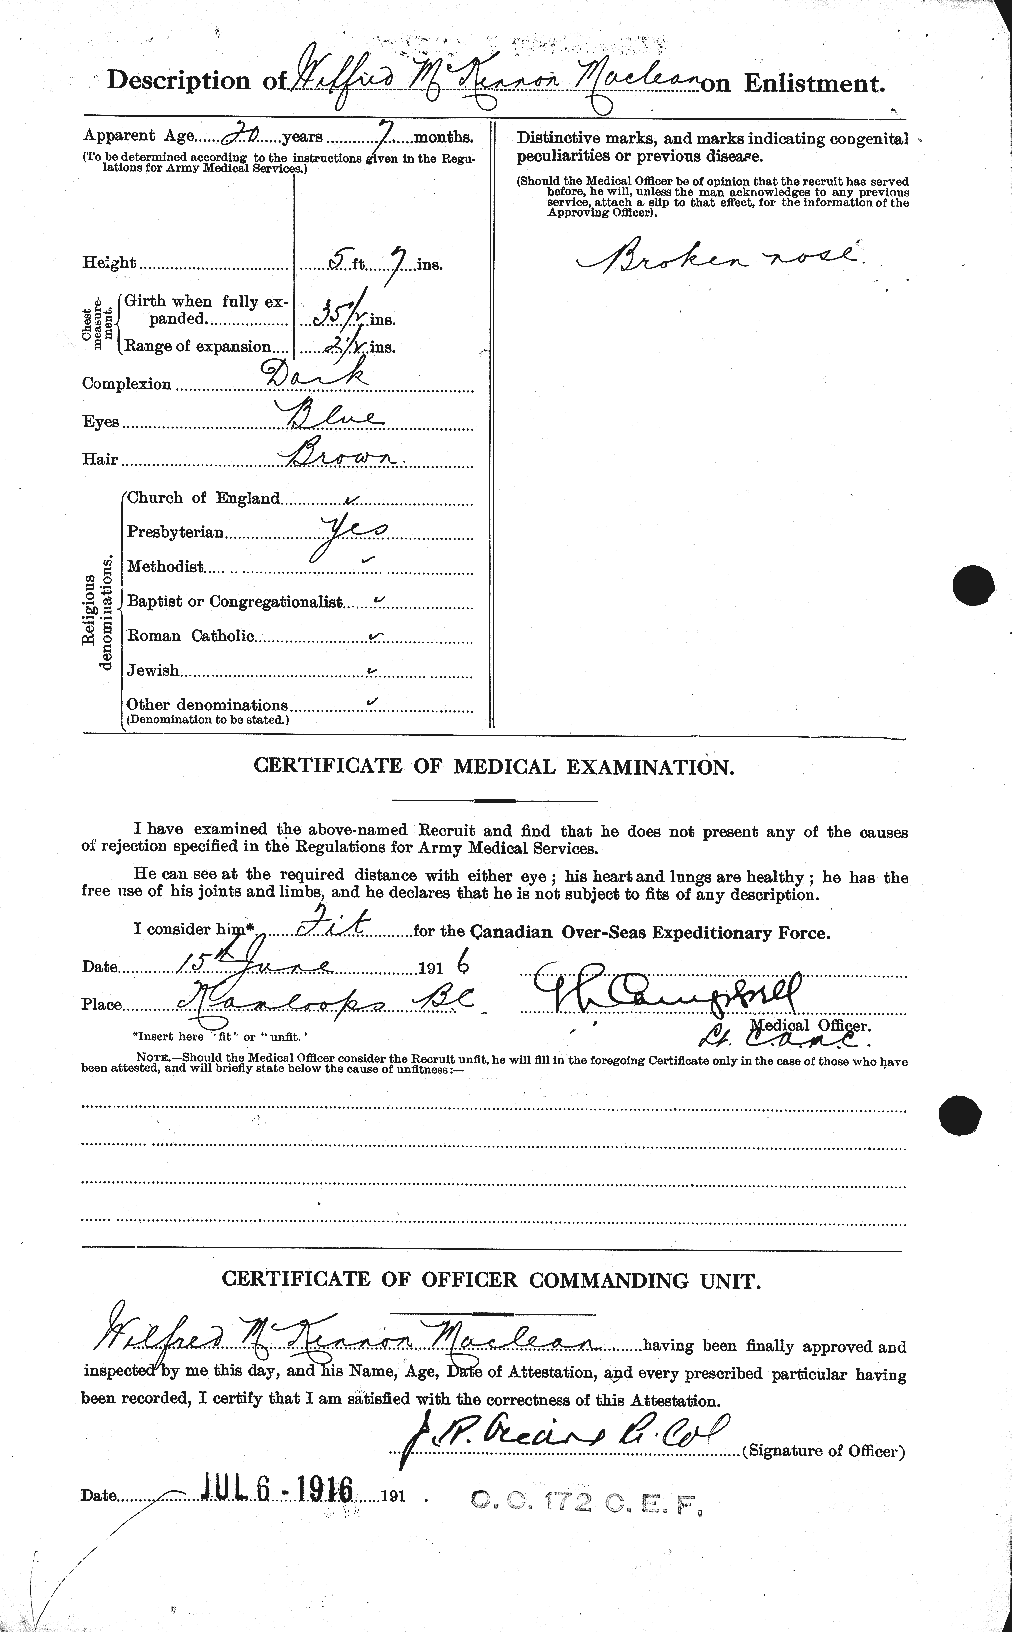 Personnel Records of the First World War - CEF 535171b